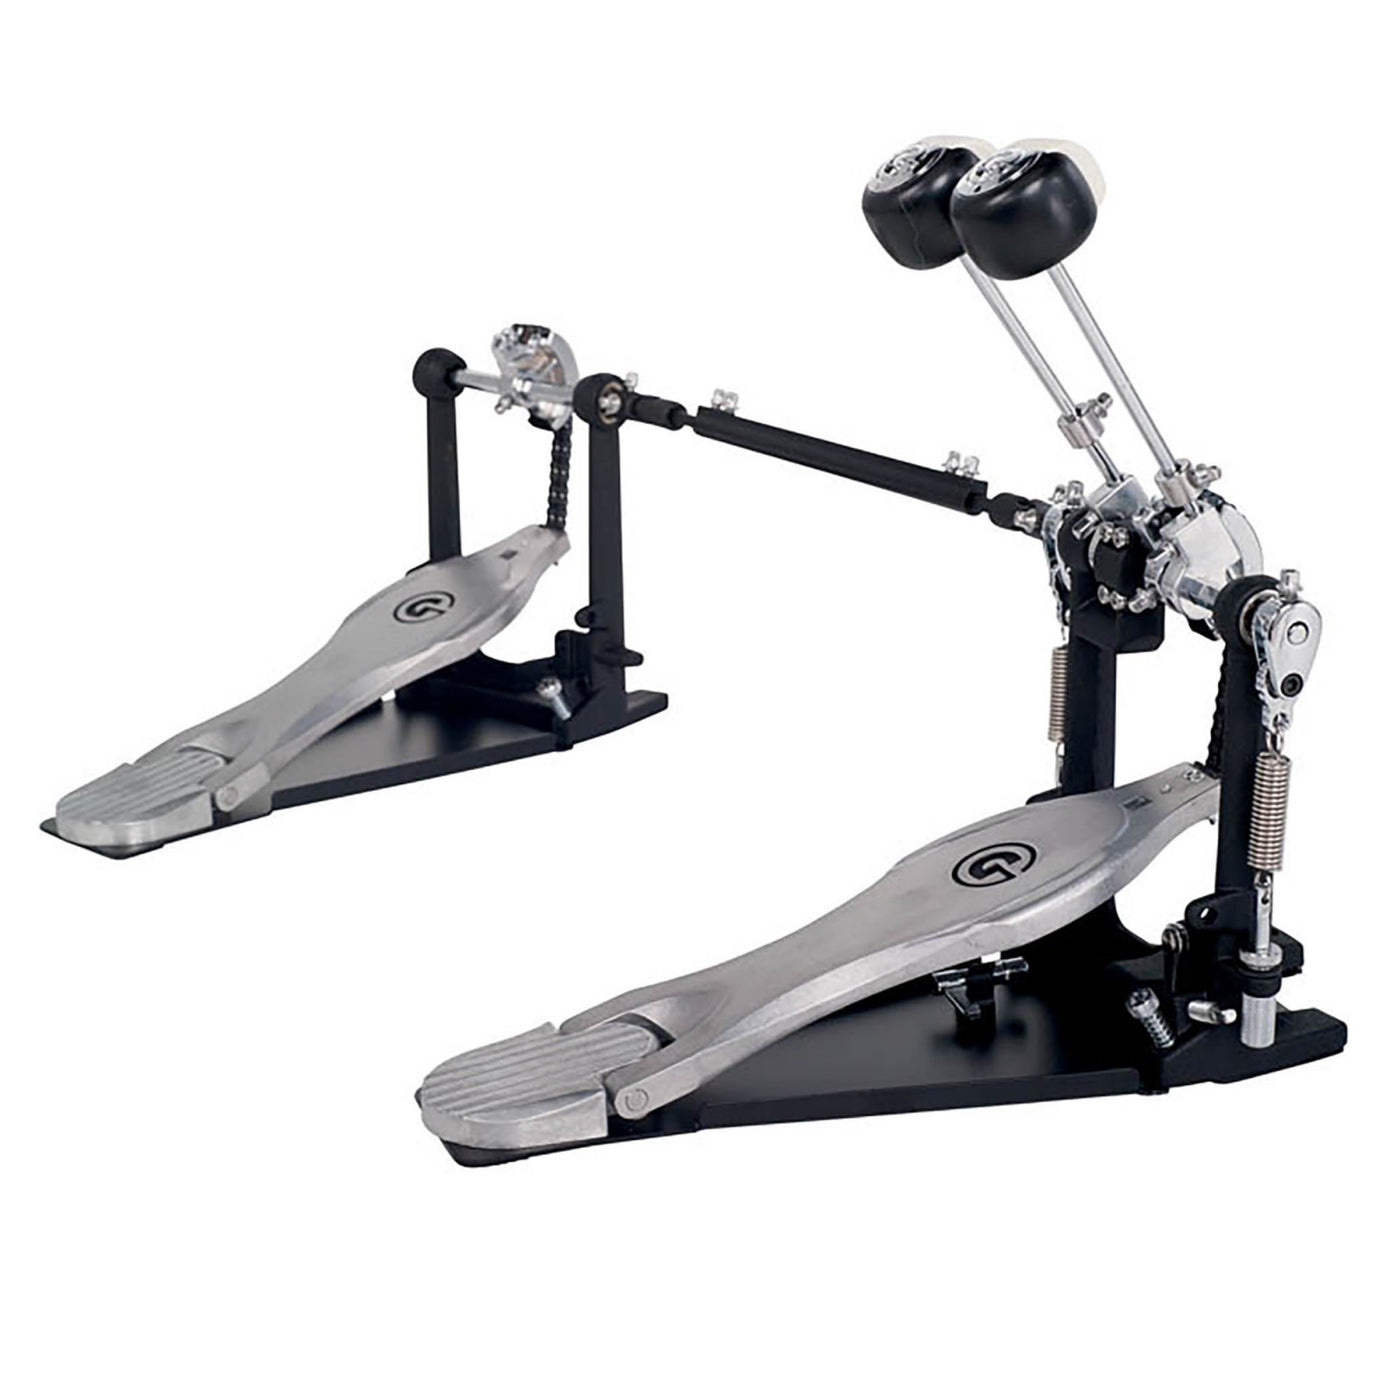 Gibraltar Chain Drive Double Bass Drum Pedal